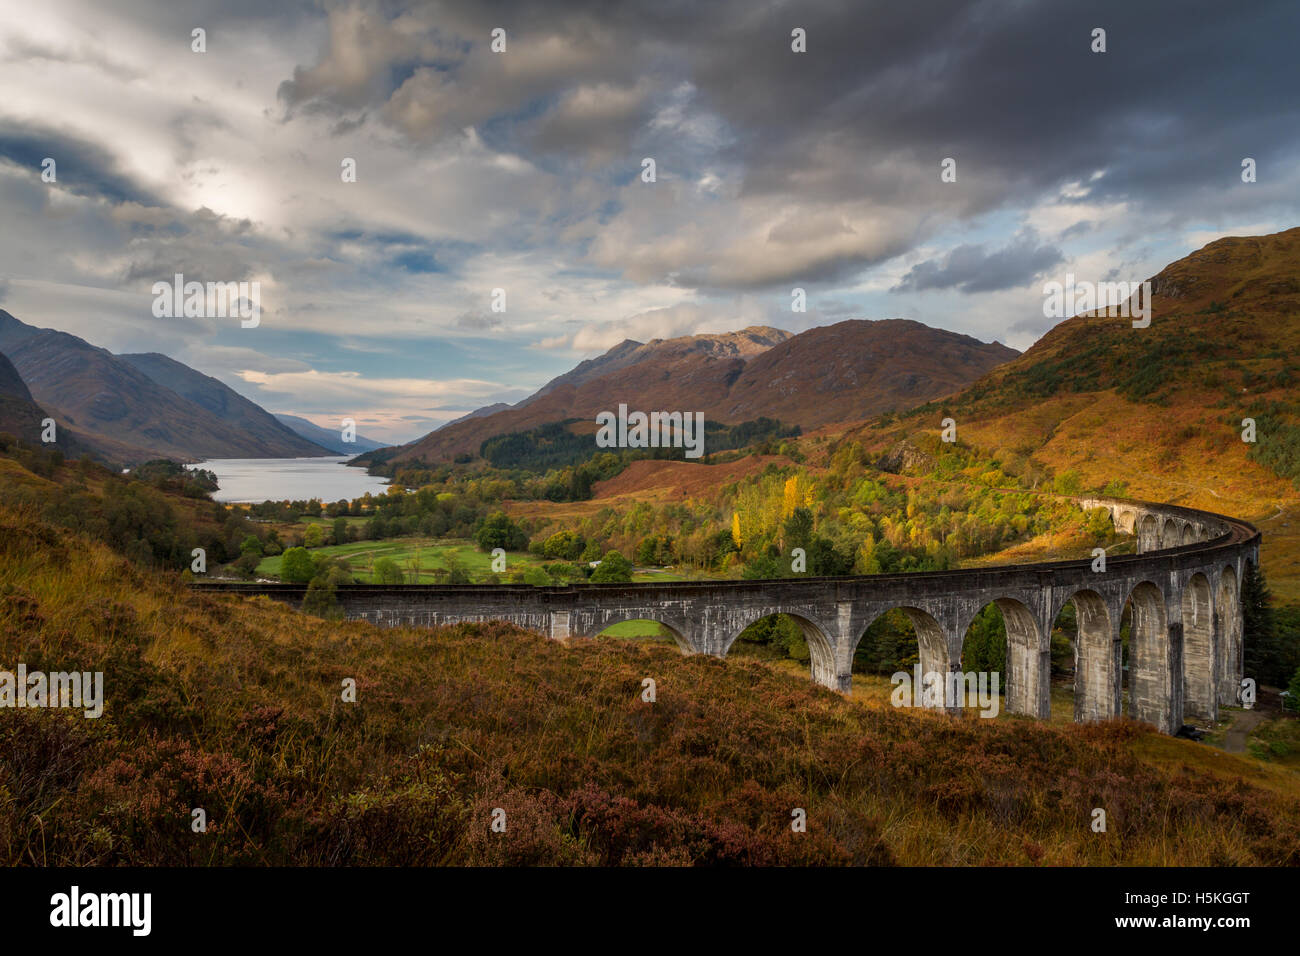 Autumn colours in the mountains overlooking the Glenfinnan viaduct and Loch Shiel, Scottish Highlands, UK Stock Photo